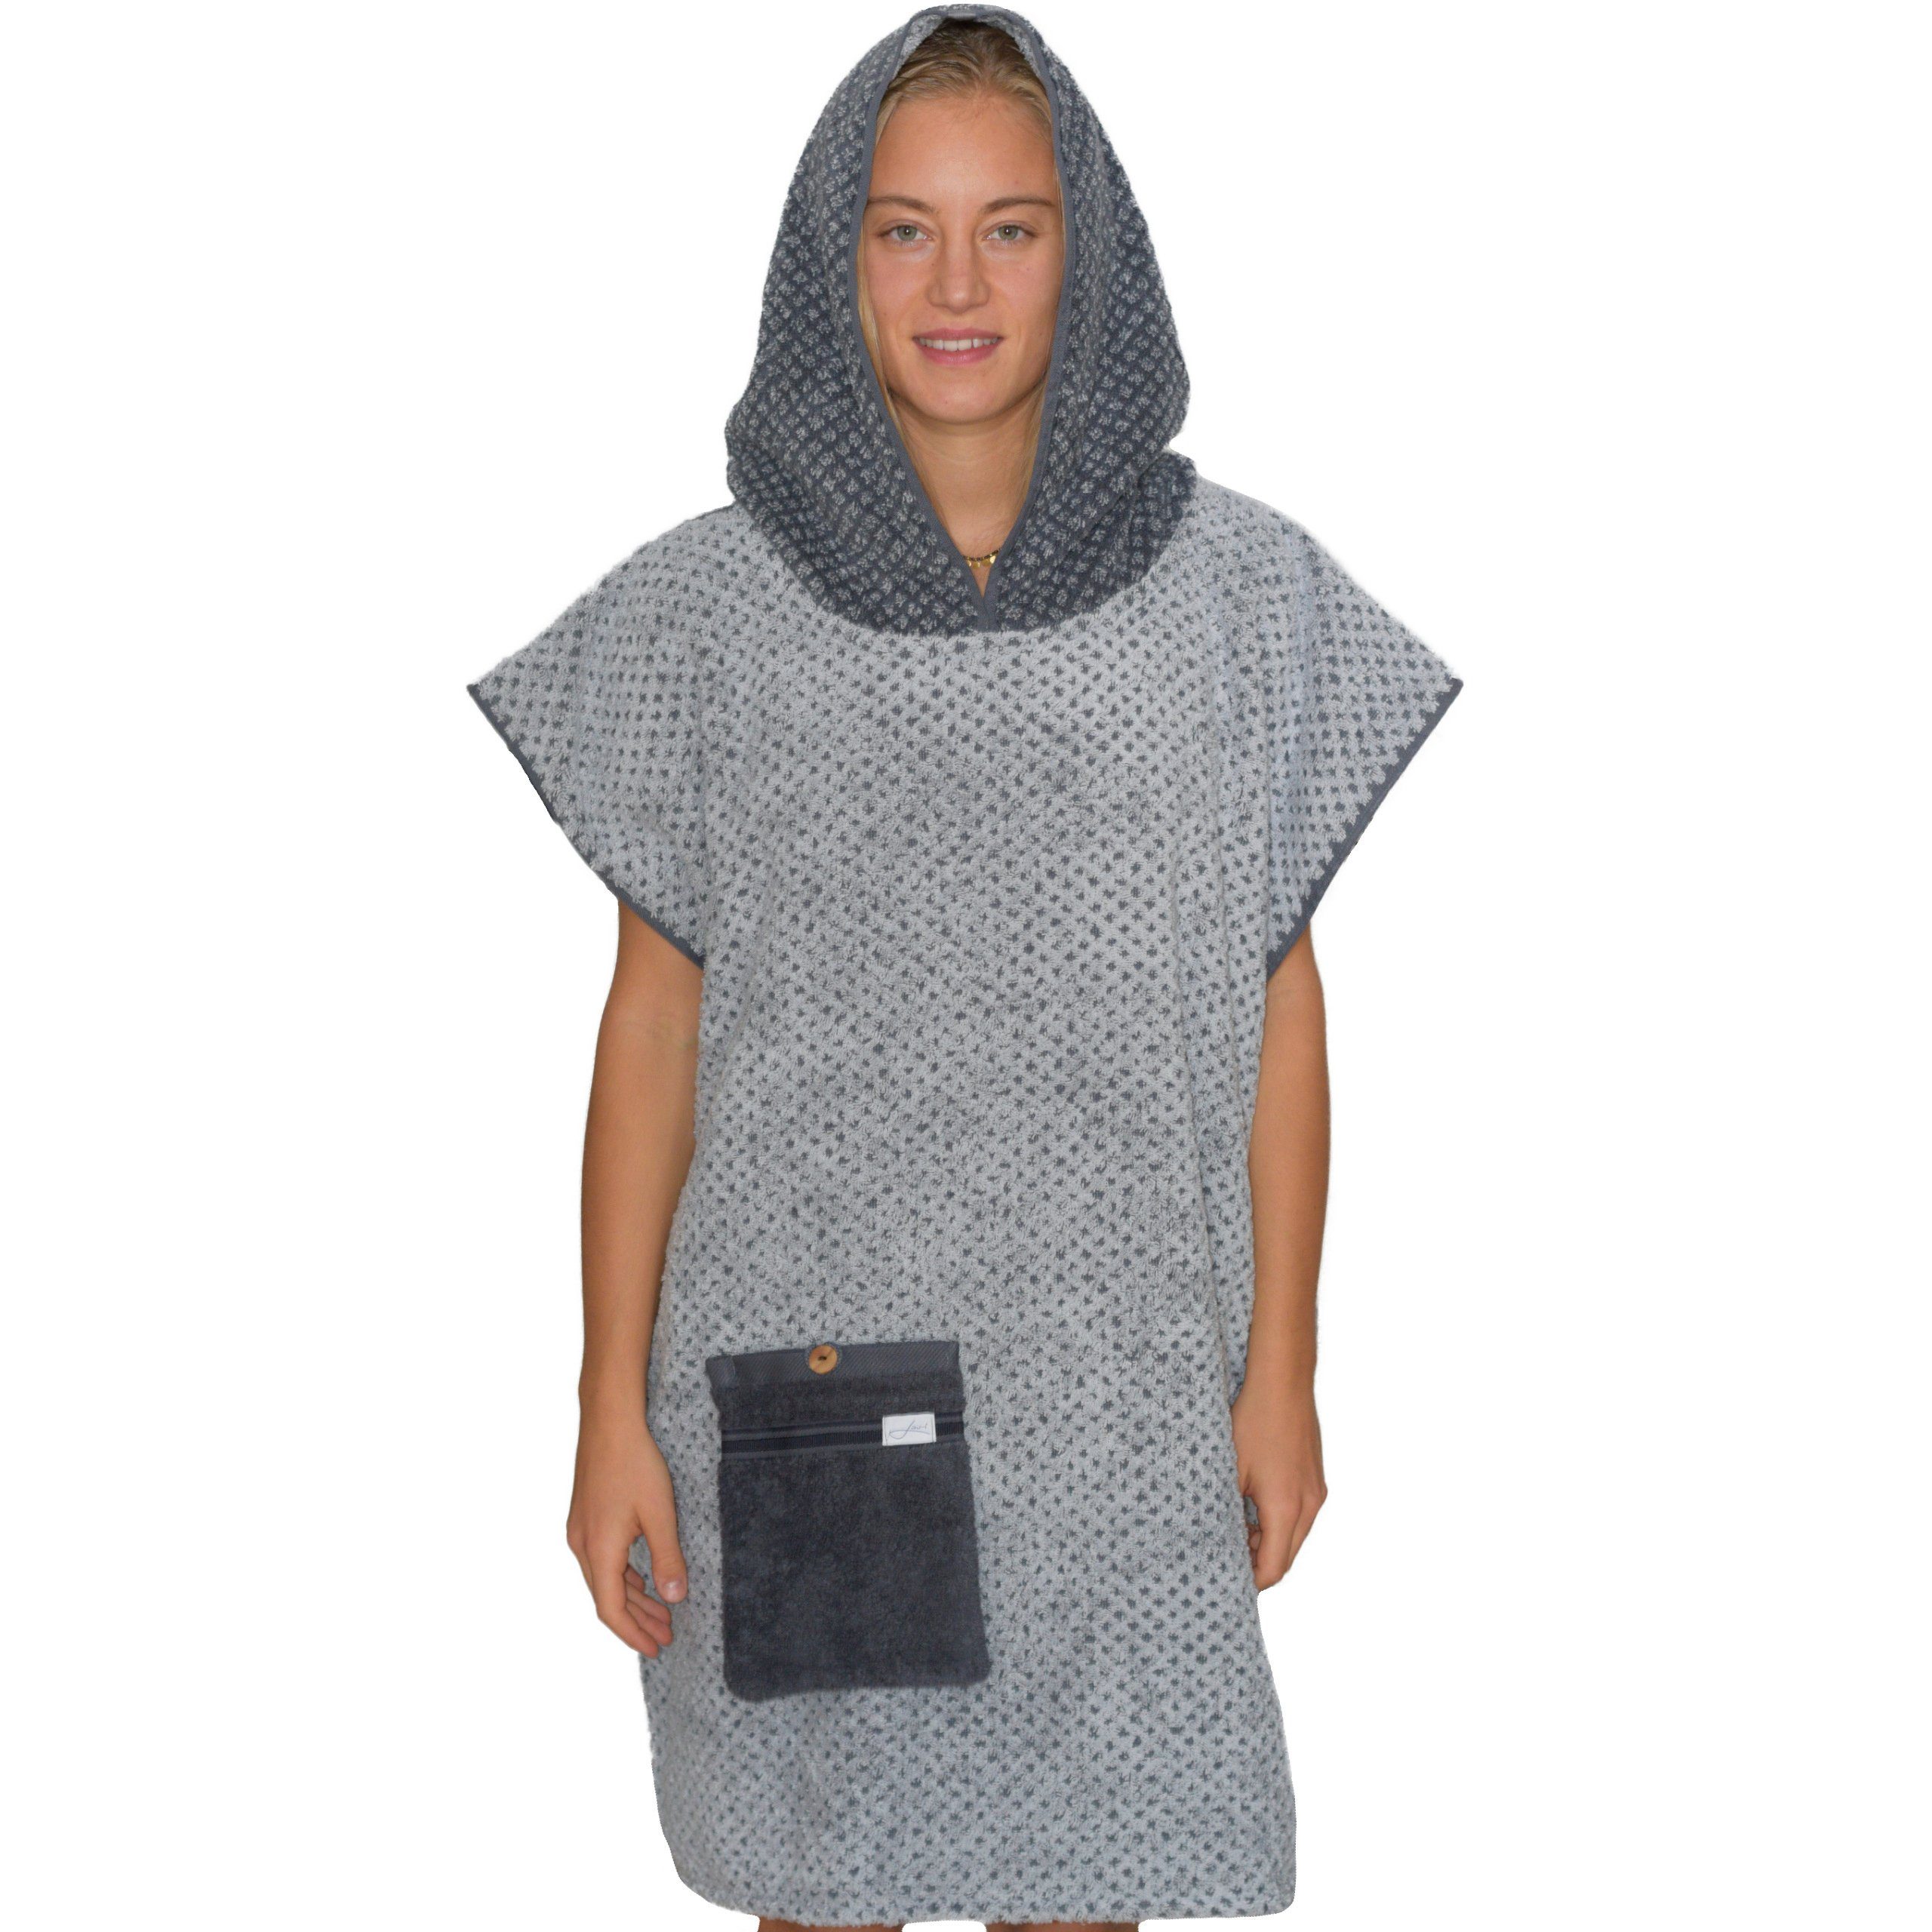 mit Surfponcho Made Tasche in Germany Badeumhang, Lou-i Frottee und Kapuze Erwachsene Kapuze, Silber Badeponcho